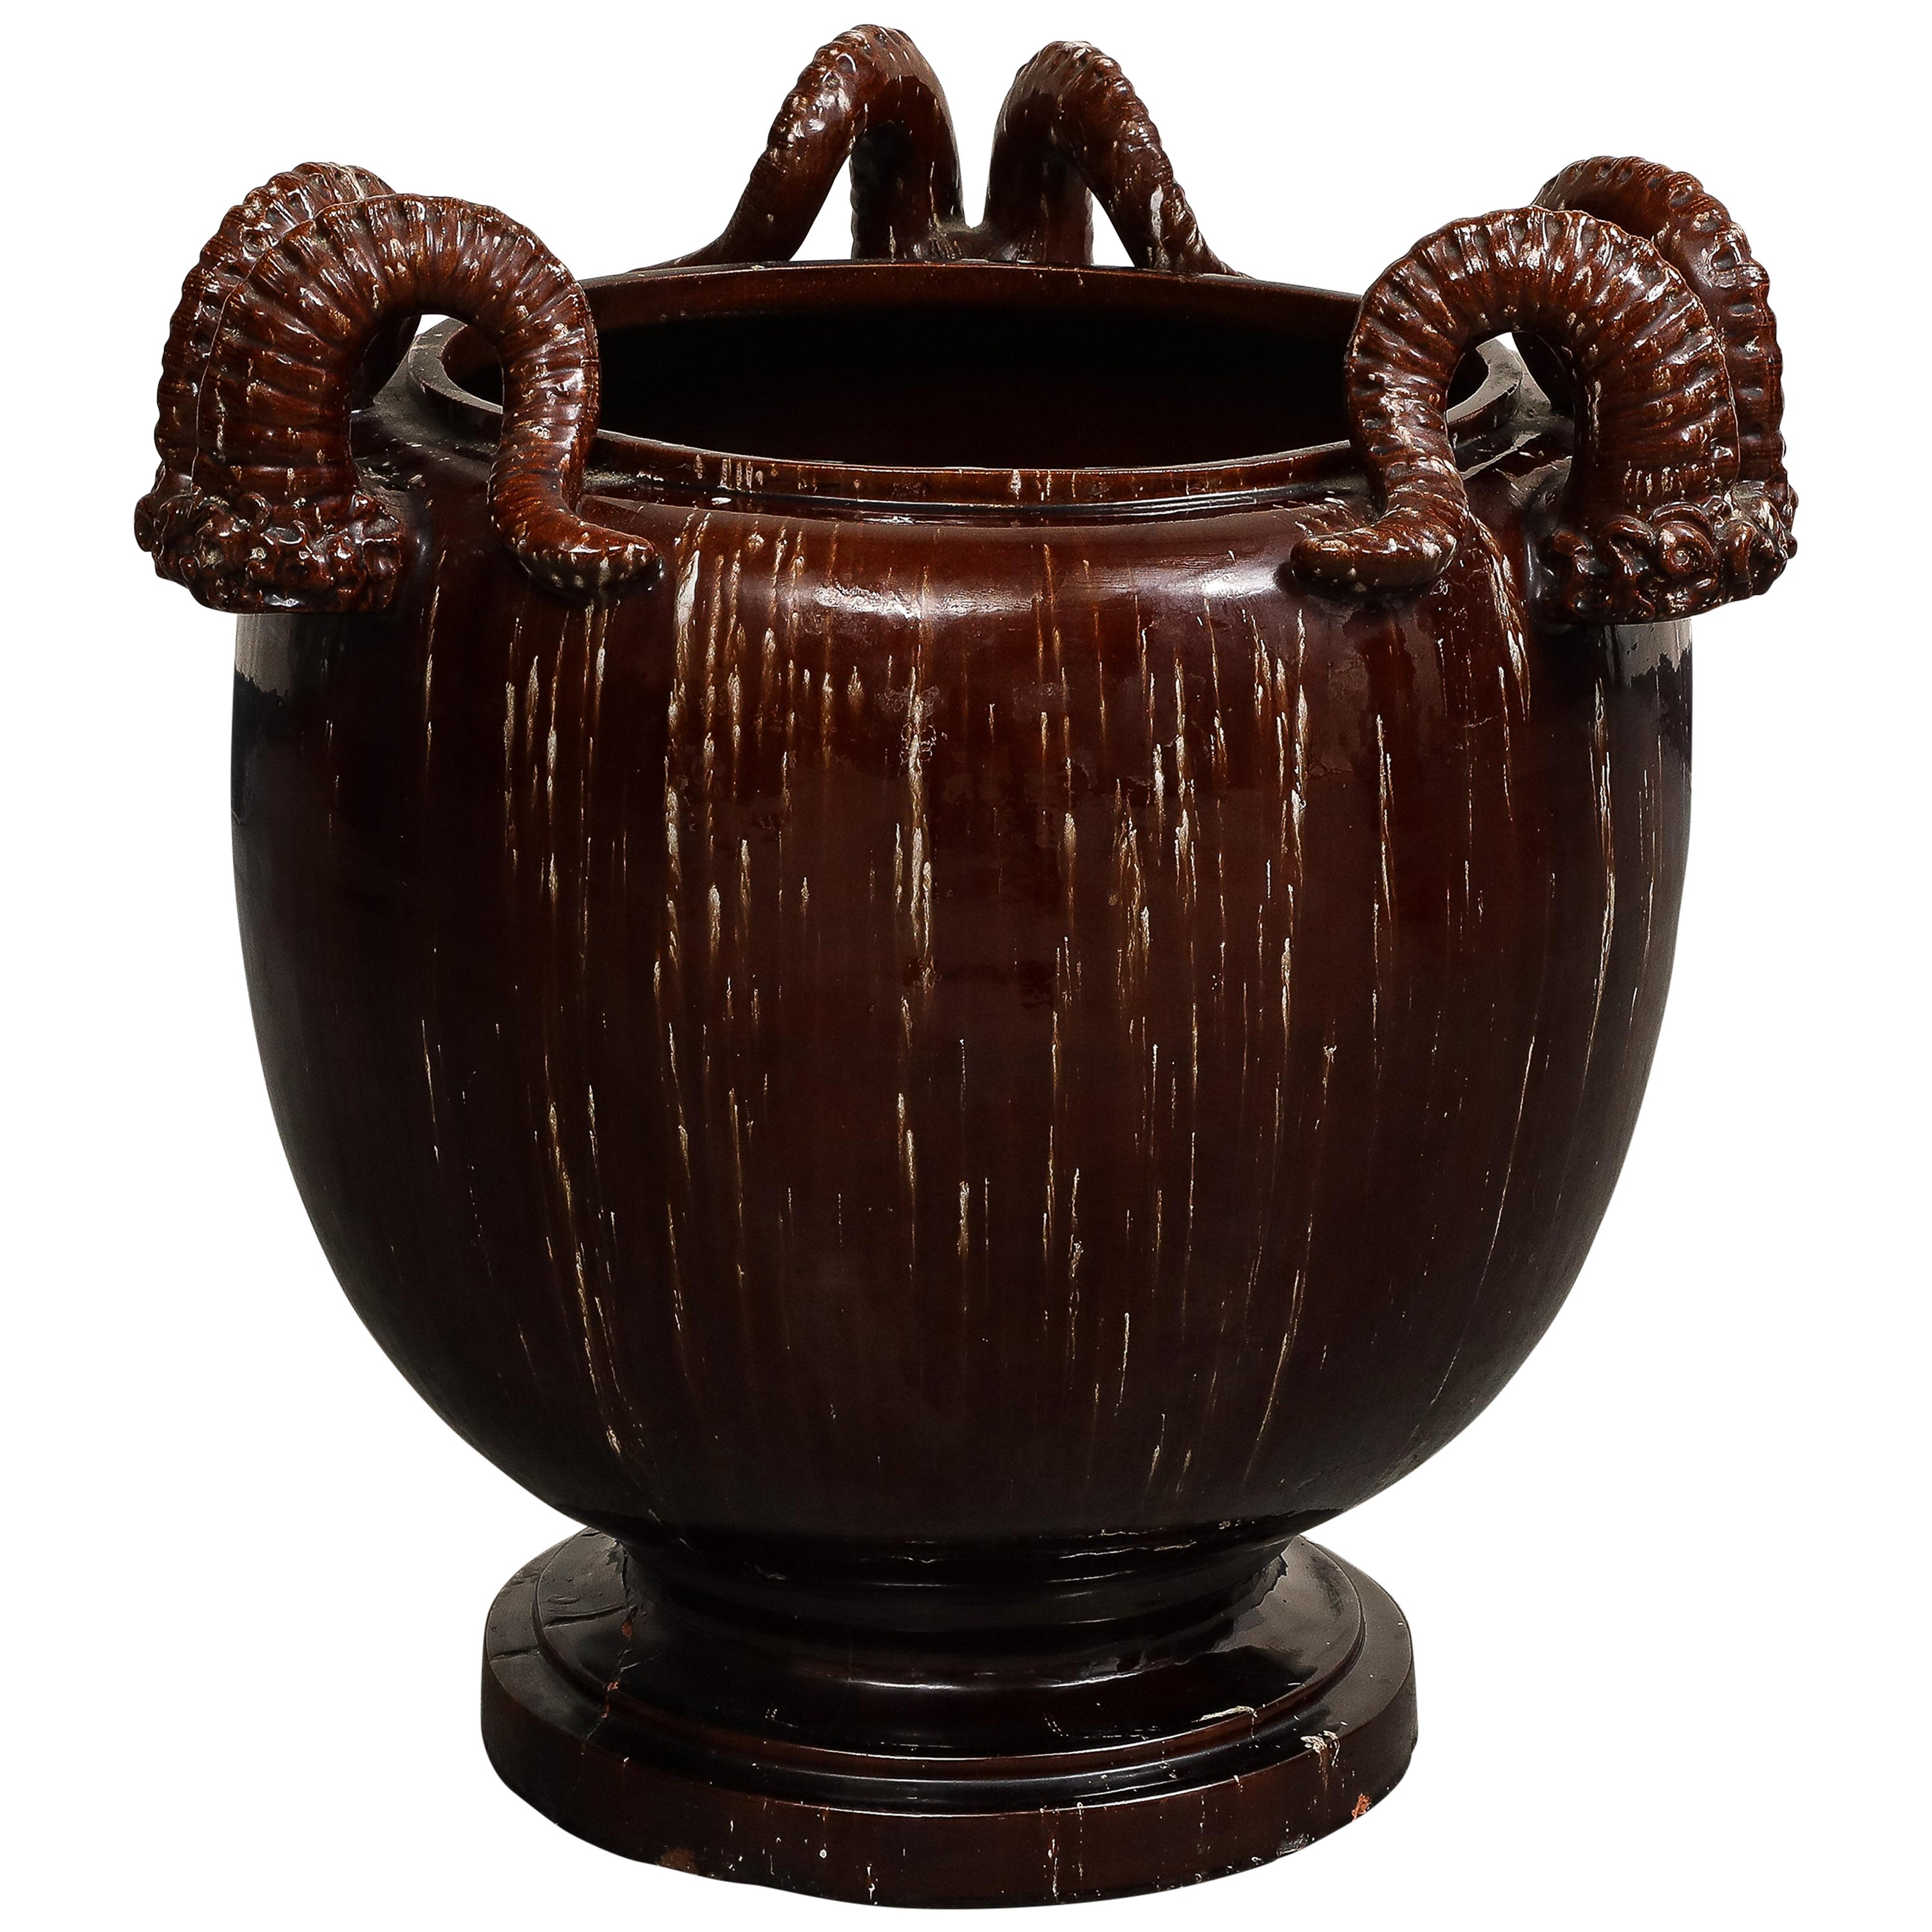 Burgundy Glazed Chinese Pottery Jardiniere with Ram's Horns